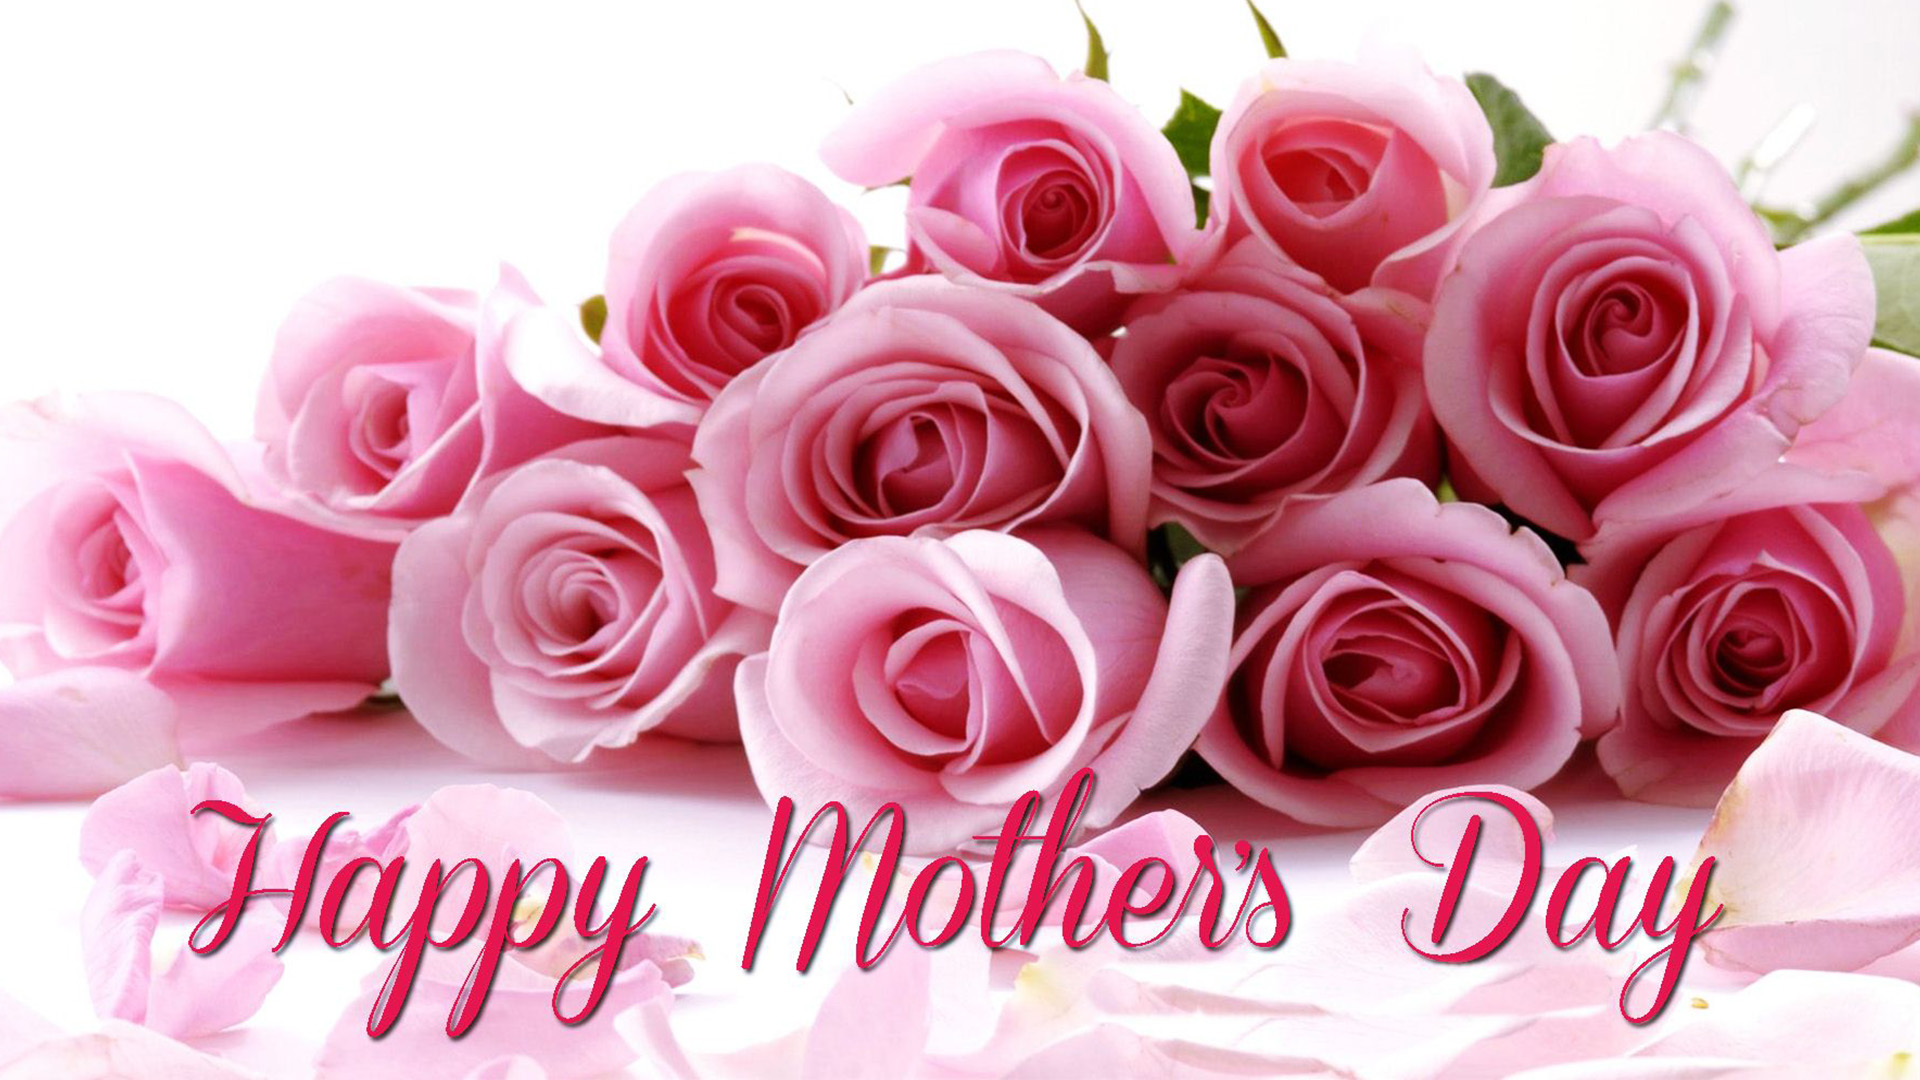 happy mothers day 2018 images